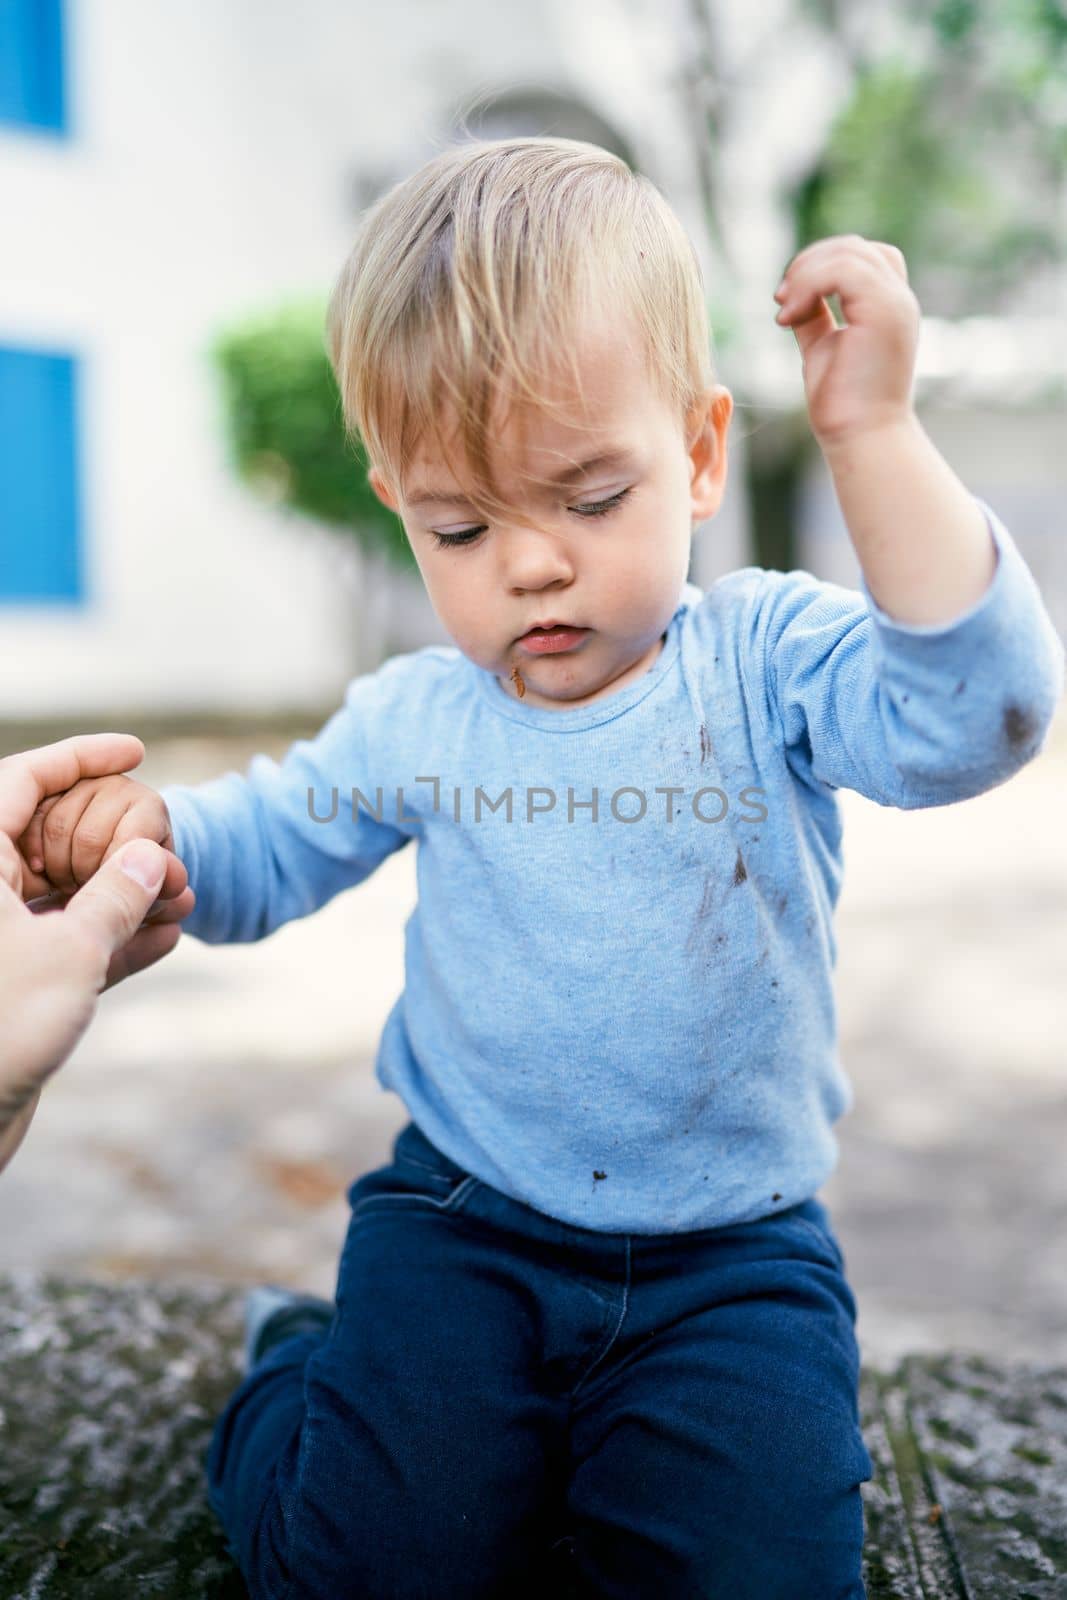 Kid sits on a stone fence in the yard with his hands up. High quality photo